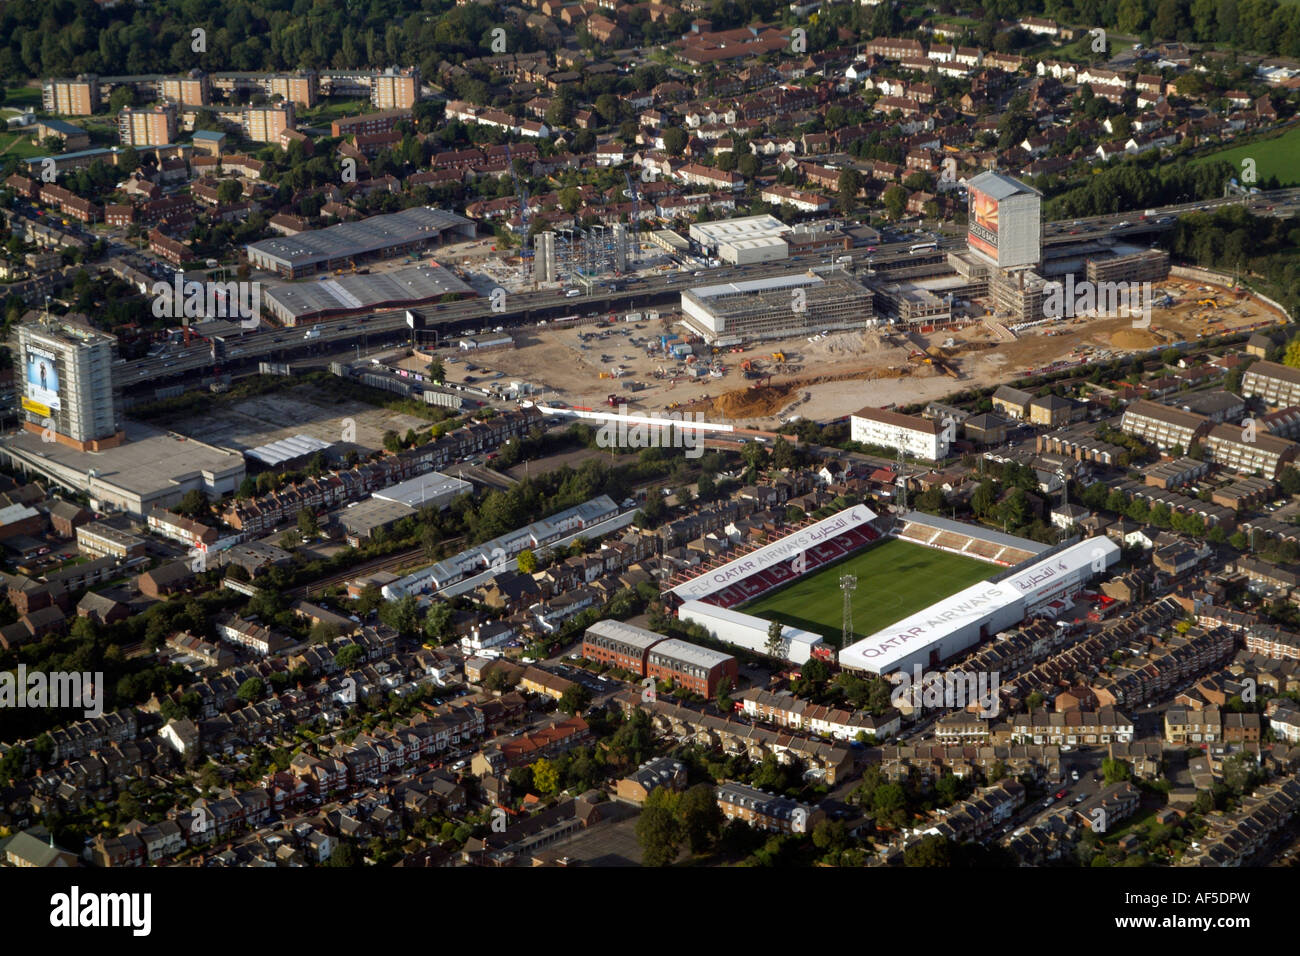 Brentford Ground / Brentford open new stadium with Carabao Cup win